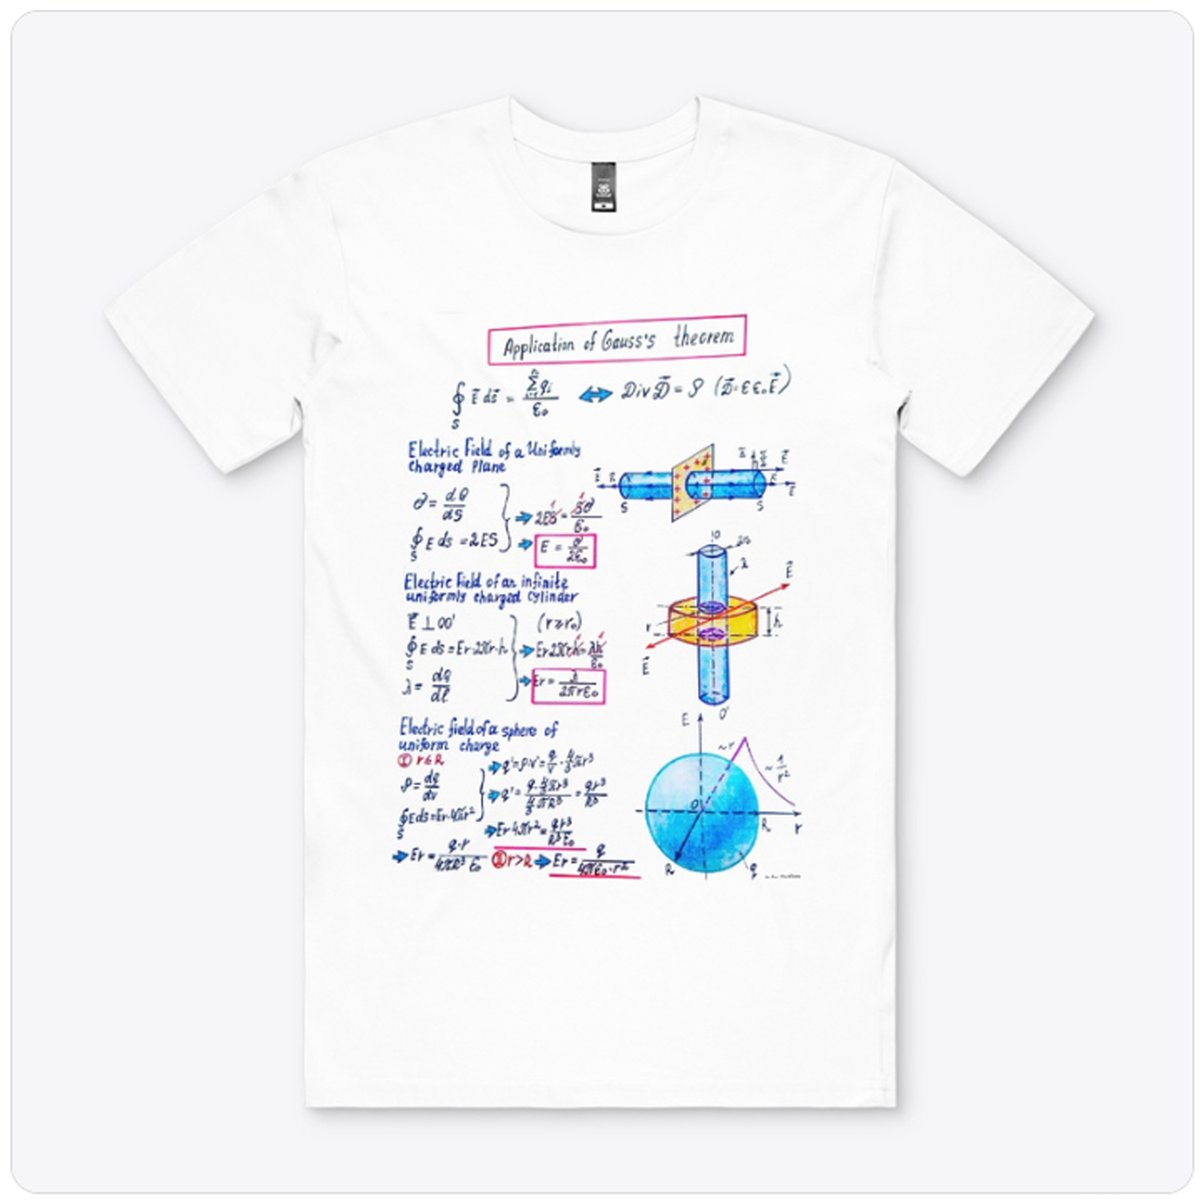 At the request of subscribers, I made a cotton T-shirt. If you have a desire to purchase cotton T-shirts, write to me about it. This T-shirt can be purchased at the link: jurij0001.creator-spring.com/listing/the-ga… Sincerely, Yuri Kovalenok #physics #art